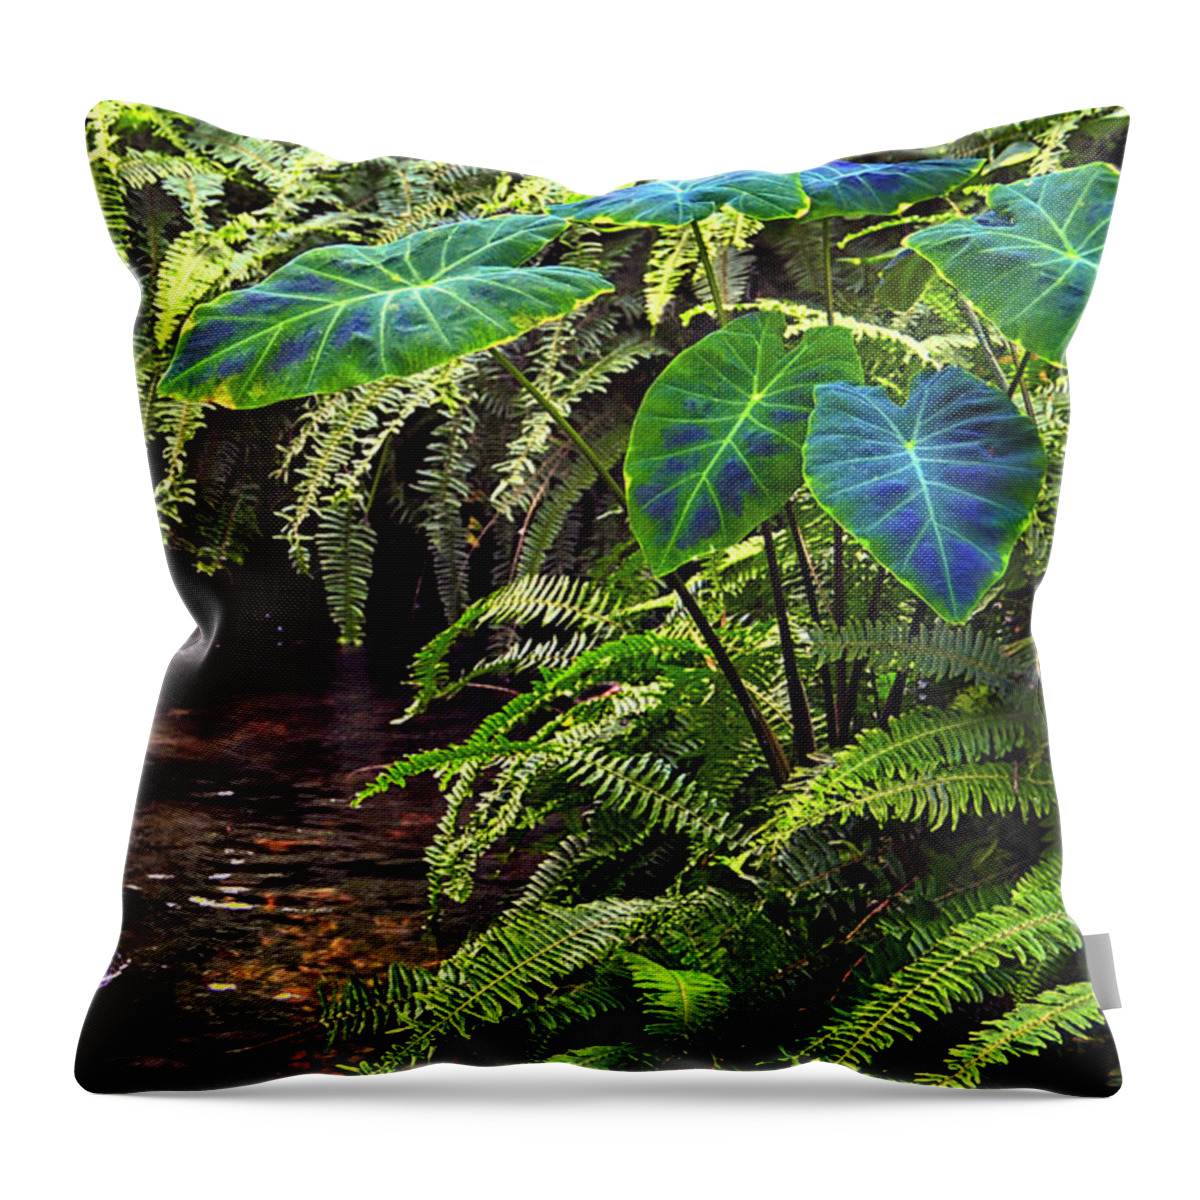 Nature Throw Pillow featuring the photograph Tranquility by Gerlinde Keating - Galleria GK Keating Associates Inc